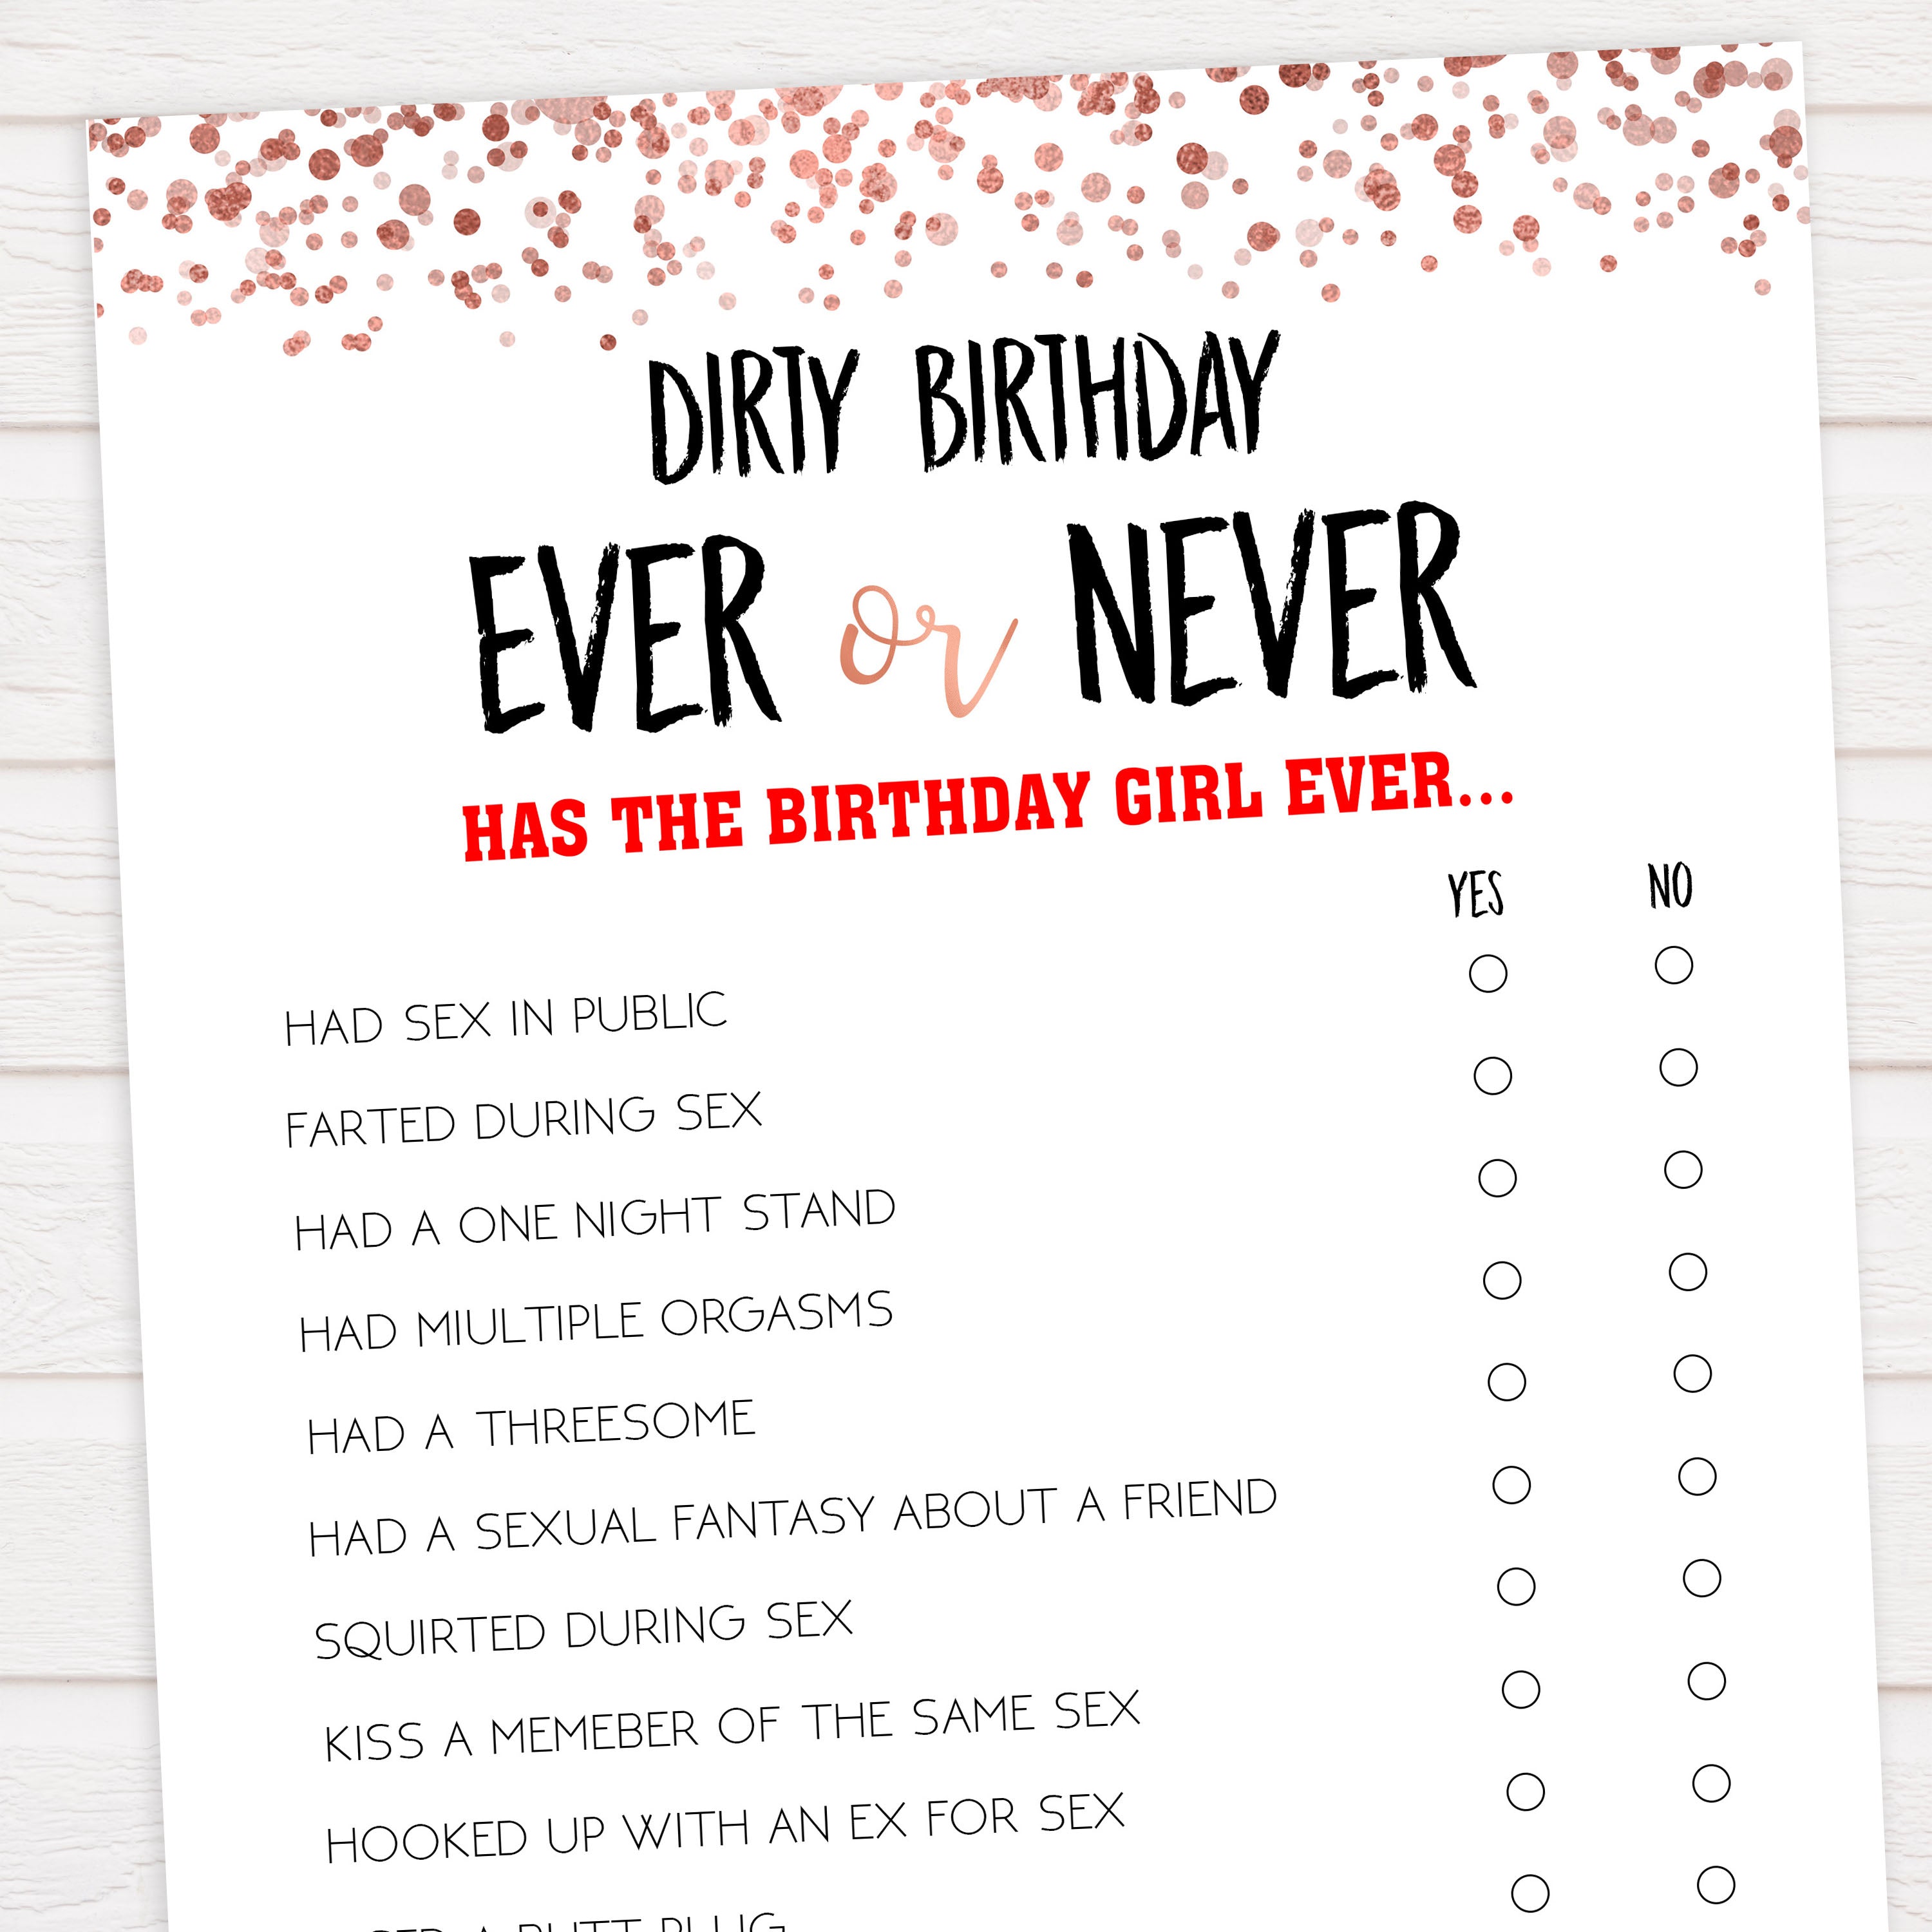 dirty birthday ever or never game, ever or never birthday game, printable birthday games, adult birthday games